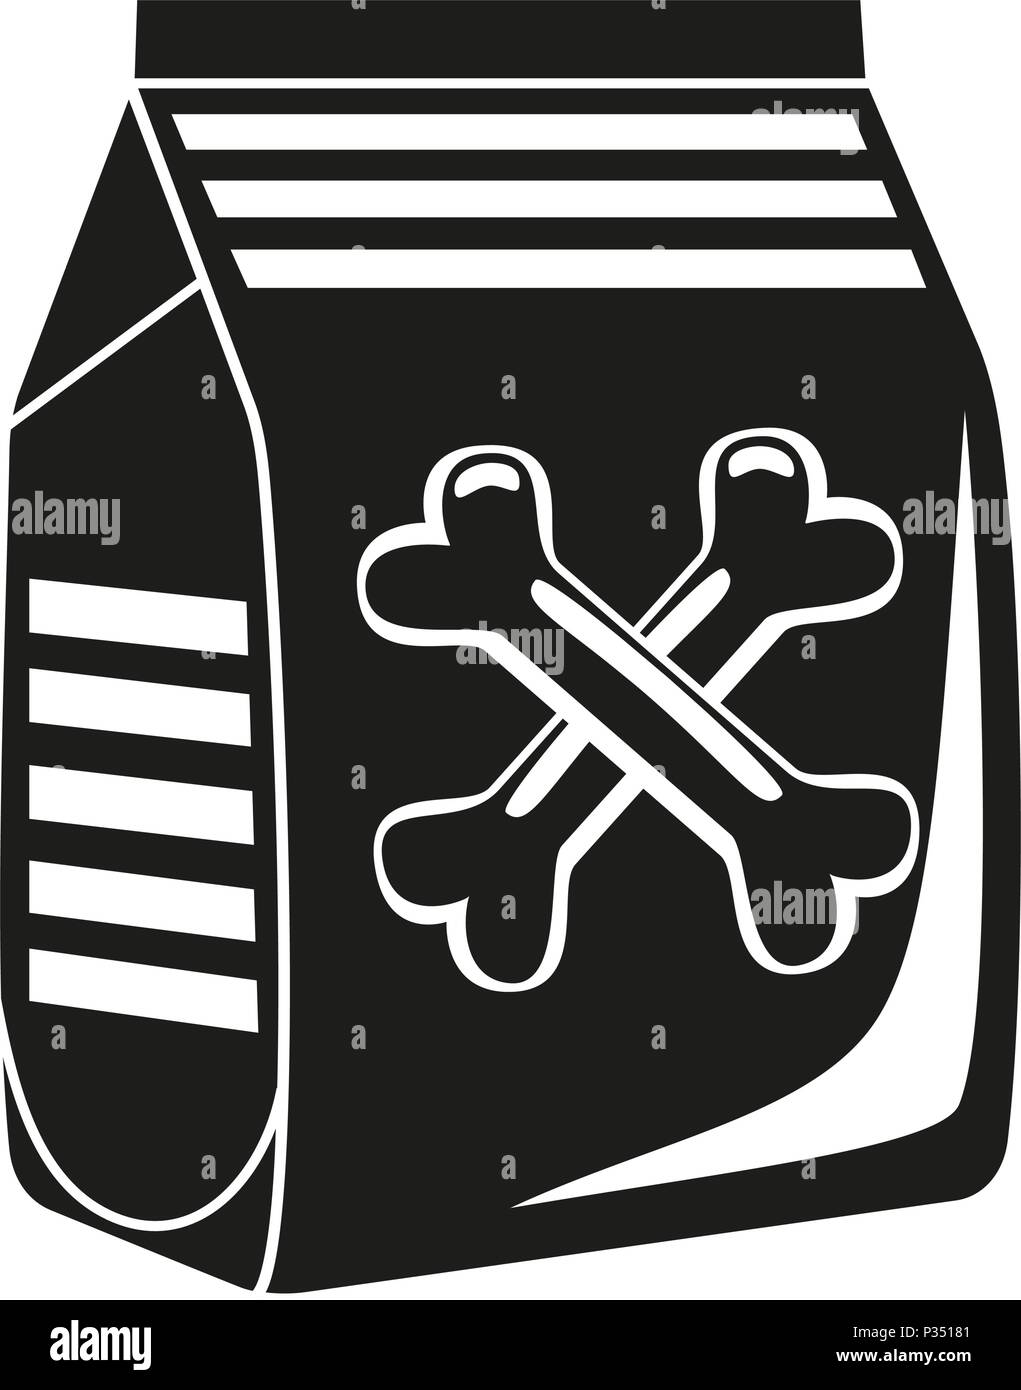 Black and white dry dog food bag silhouette Stock Vector